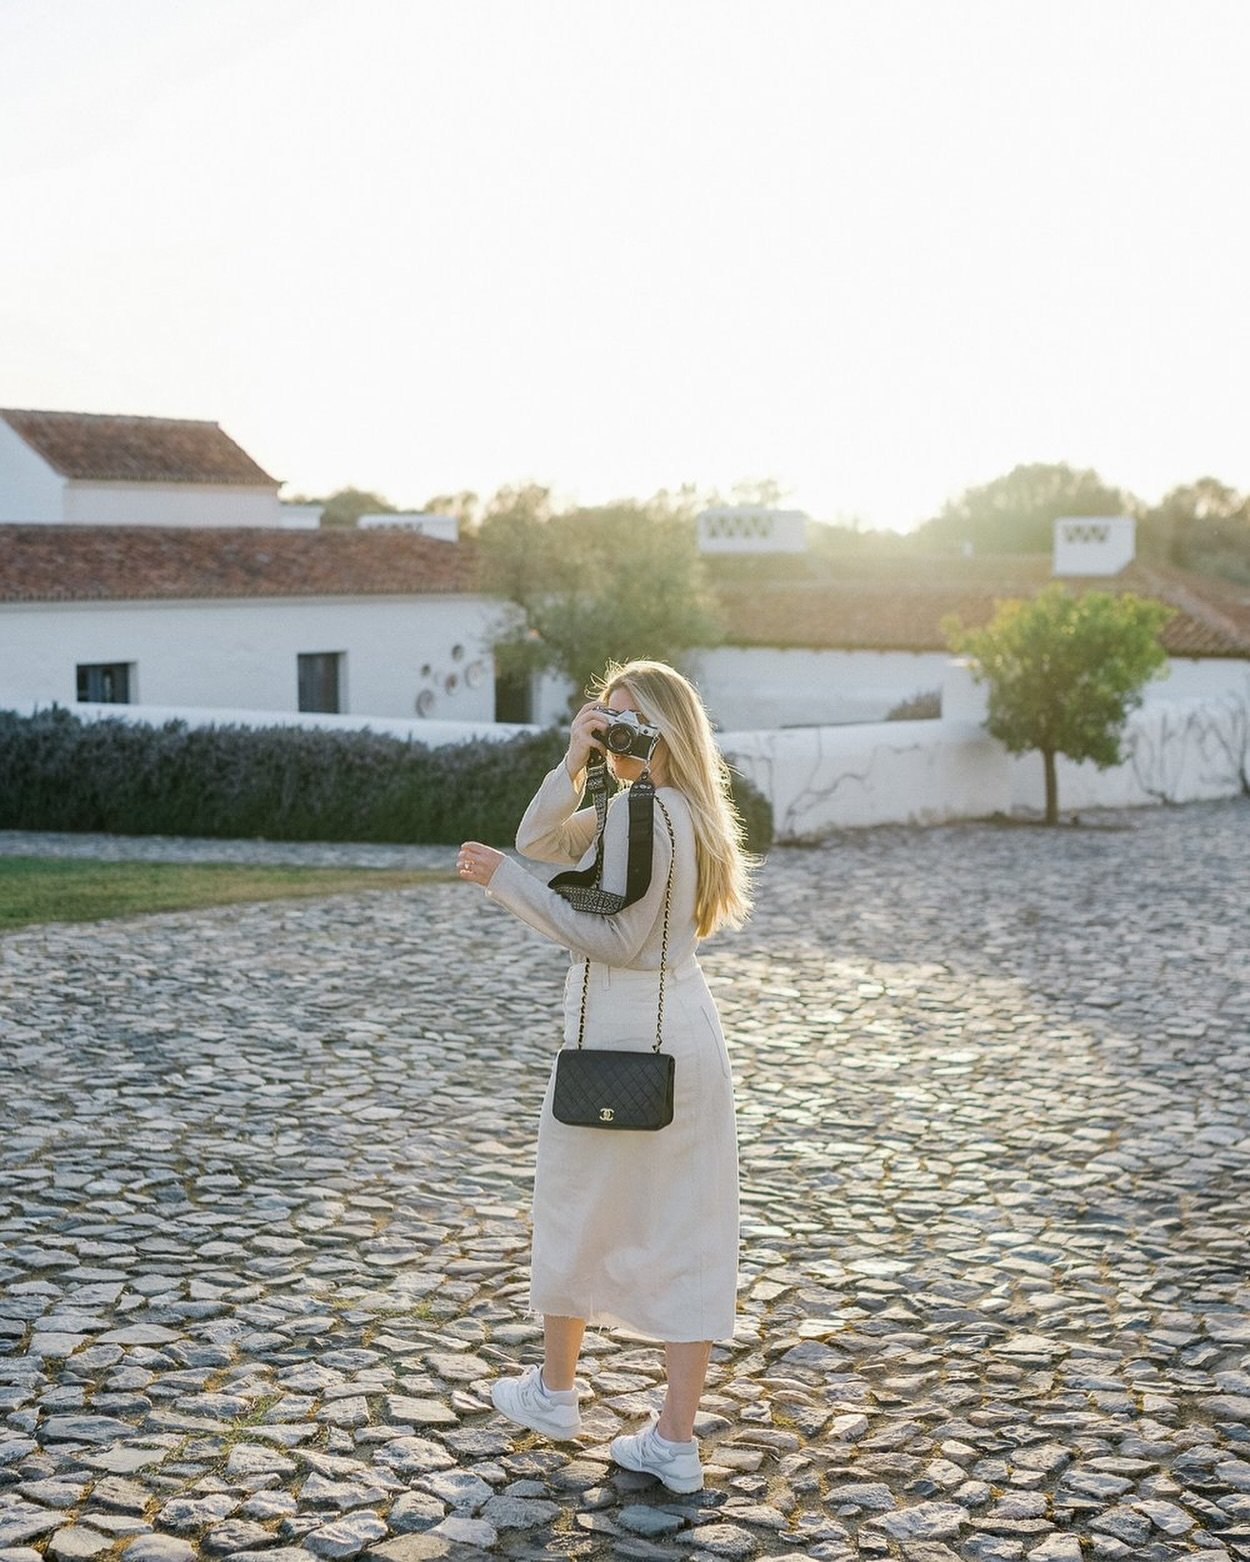 Have camera, will travel 🎞️🌿

Thanks to @johnwilke for this cute pic of me last spring at @sao_lourenco_do_barrocal 🤍

//

#portugalwedding #portugalweddingphotographer #s&atilde;olouren&ccedil;o #saolourencodobarrocal #lisbonweddingphotographer #